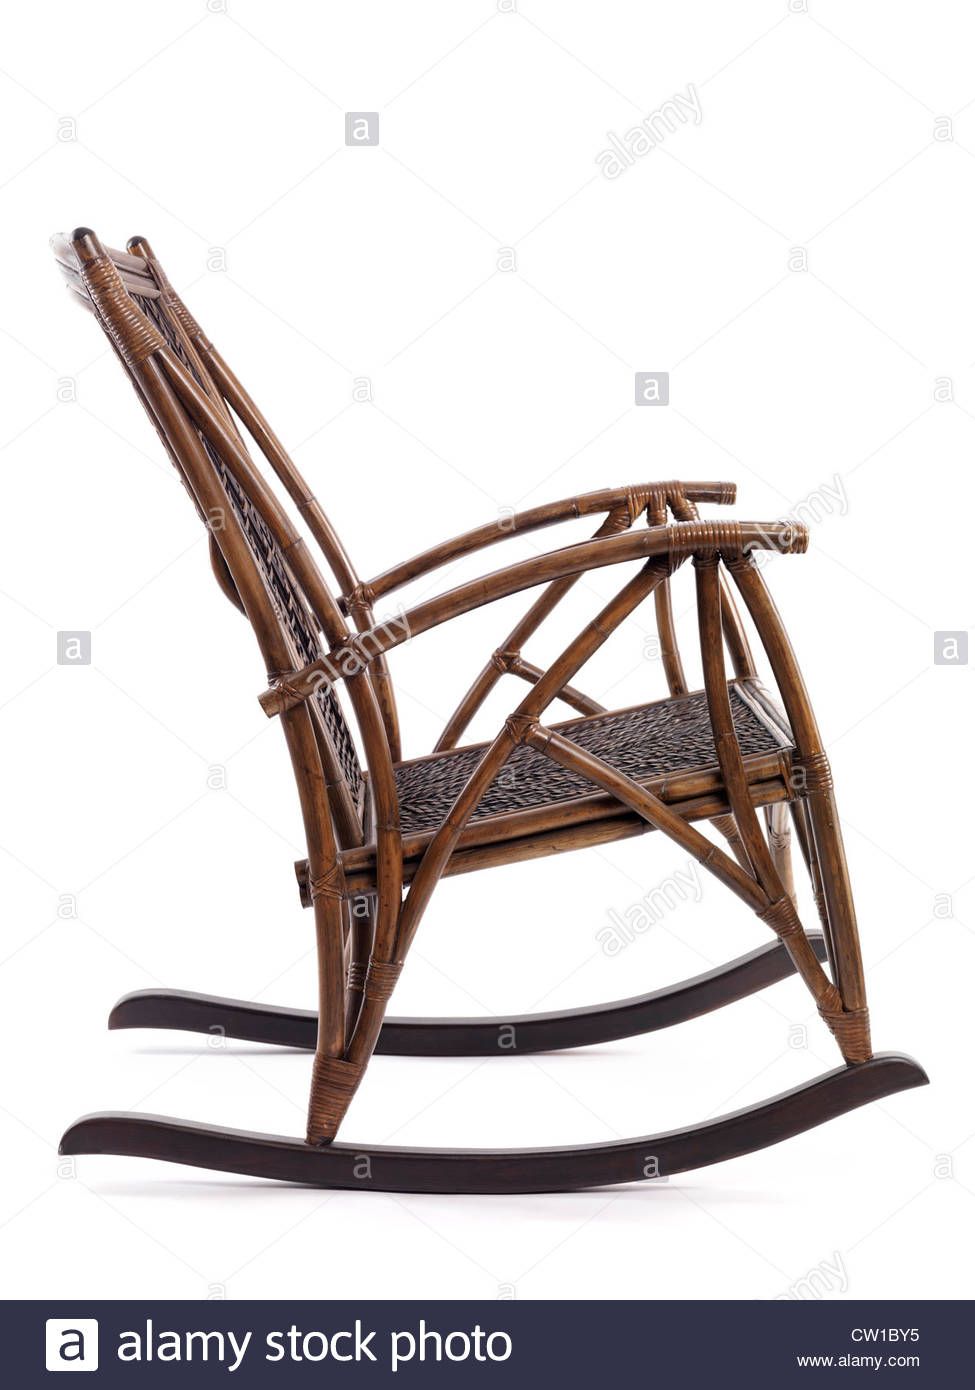 Antique Wooden Rocking Chair Side View Isolated On White Pertaining To Antique White Wooden Rocking Chairs (Photo 14 of 20)